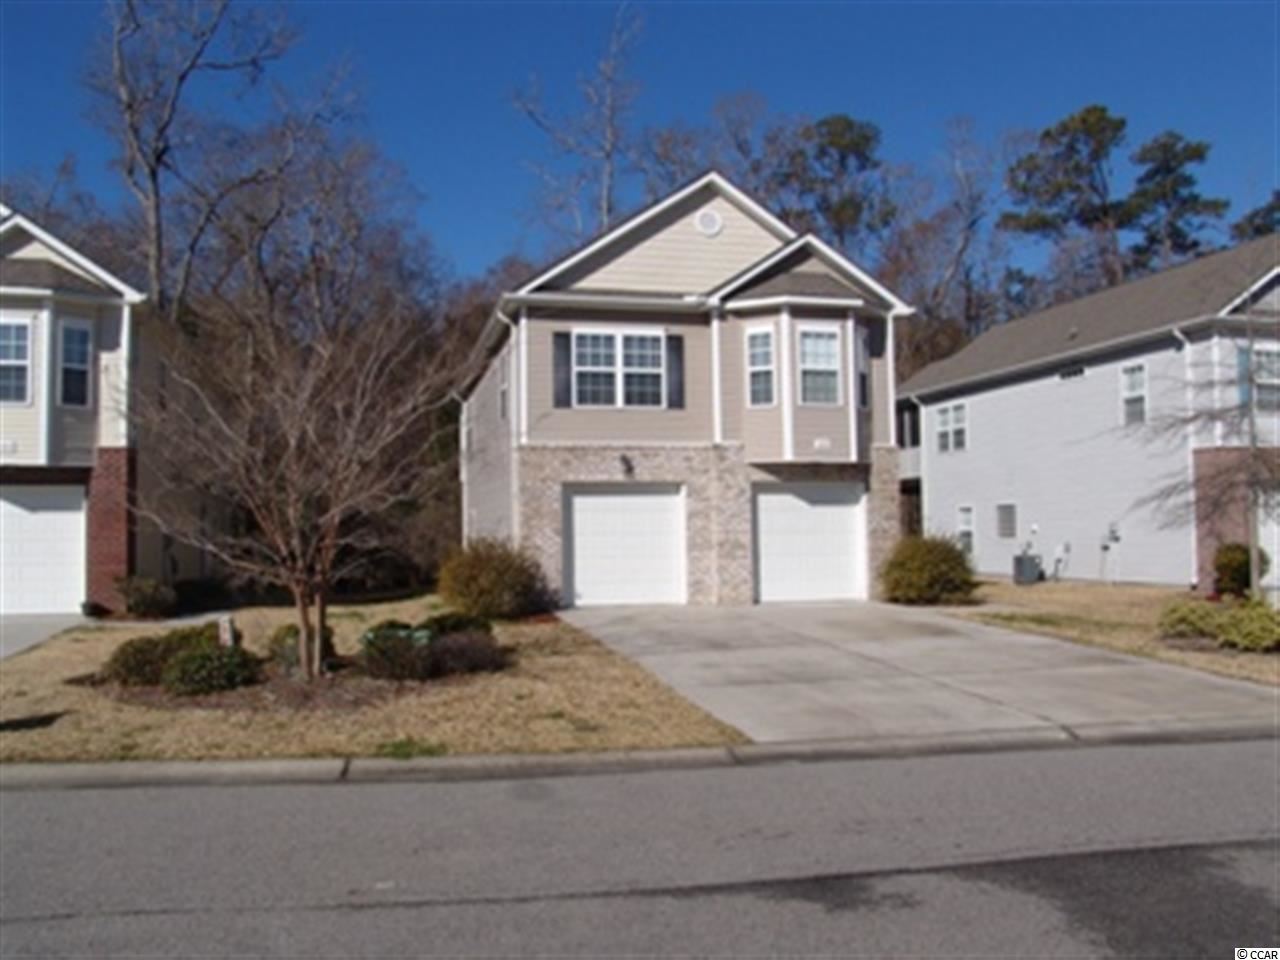 1303 Painted Tree Ln. North Myrtle Beach, SC 29582